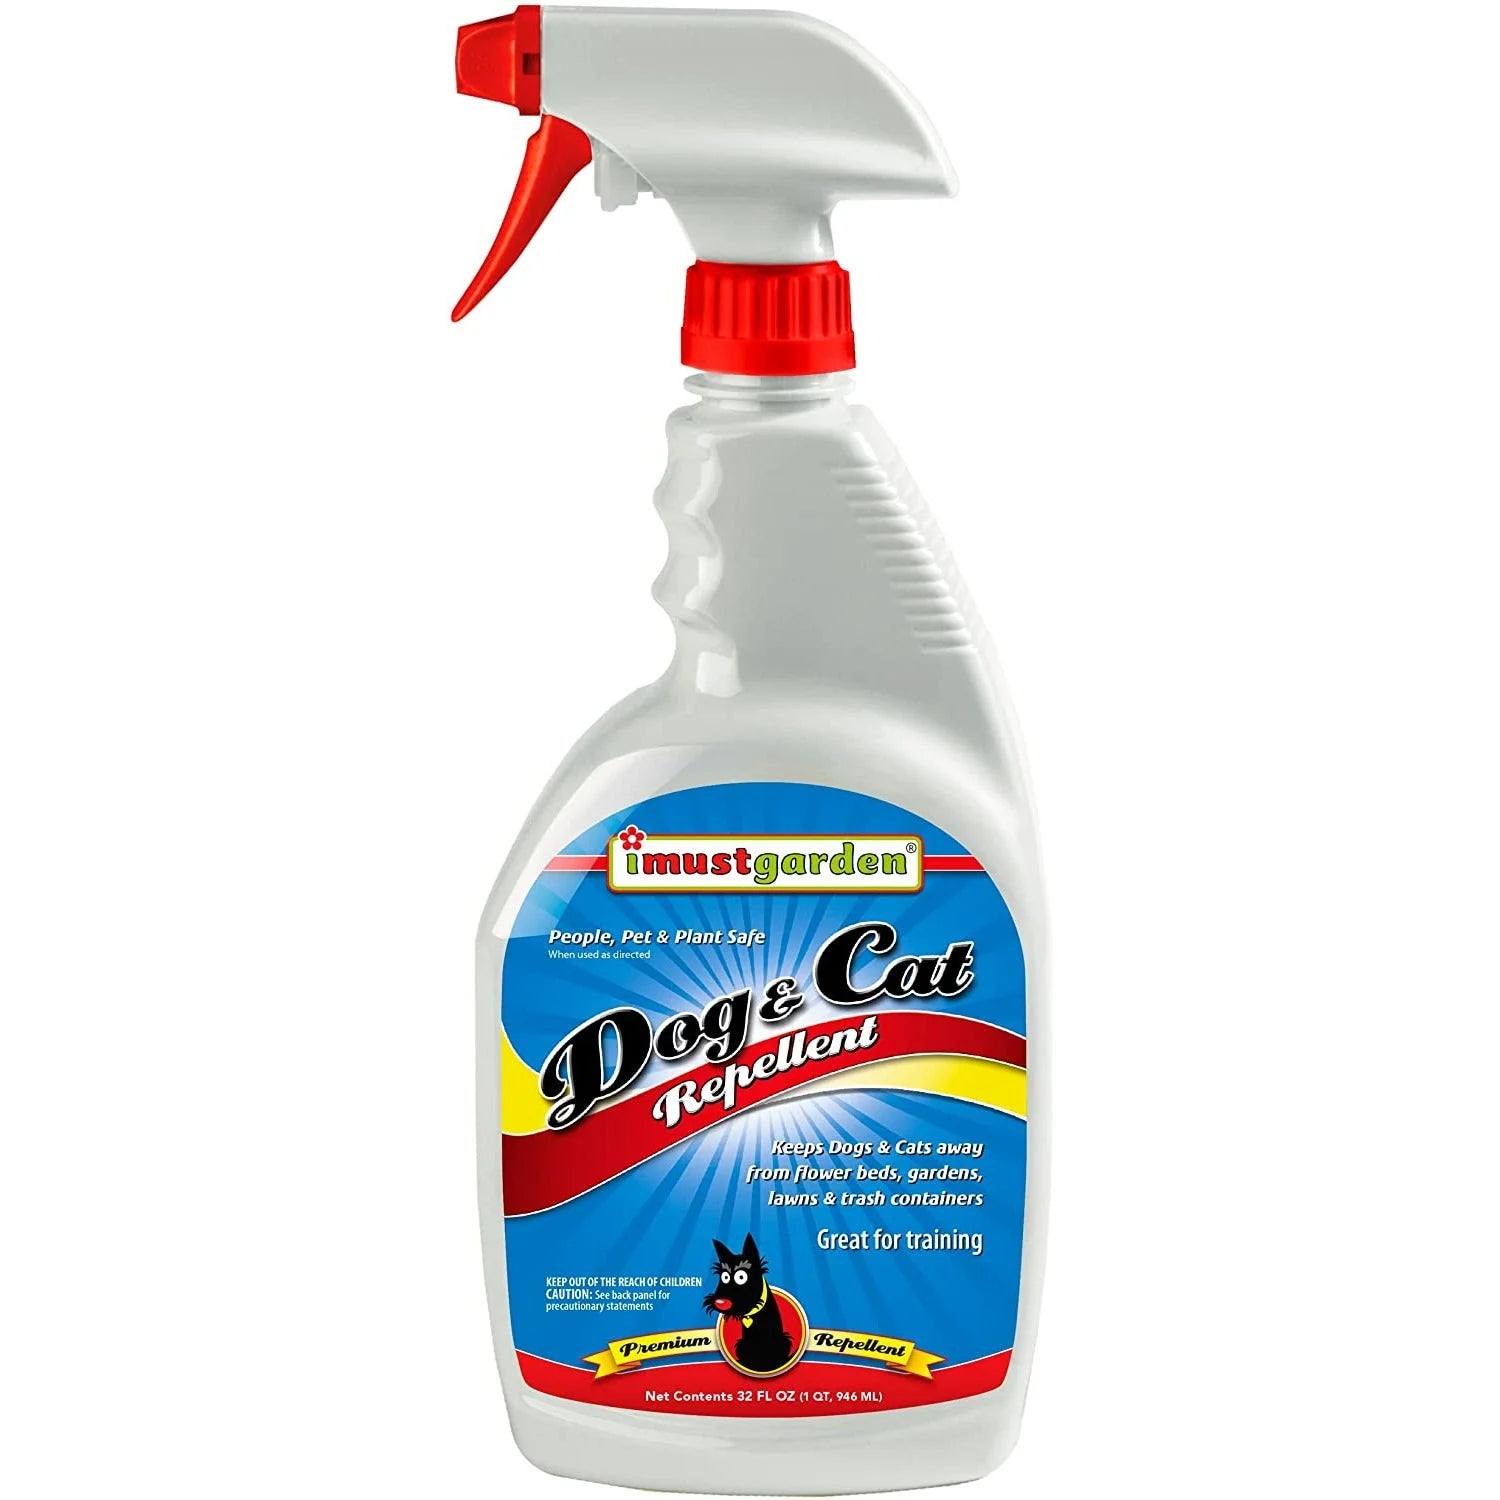 Organic Dog and Cat Repellent. Can be used indoors and outside.